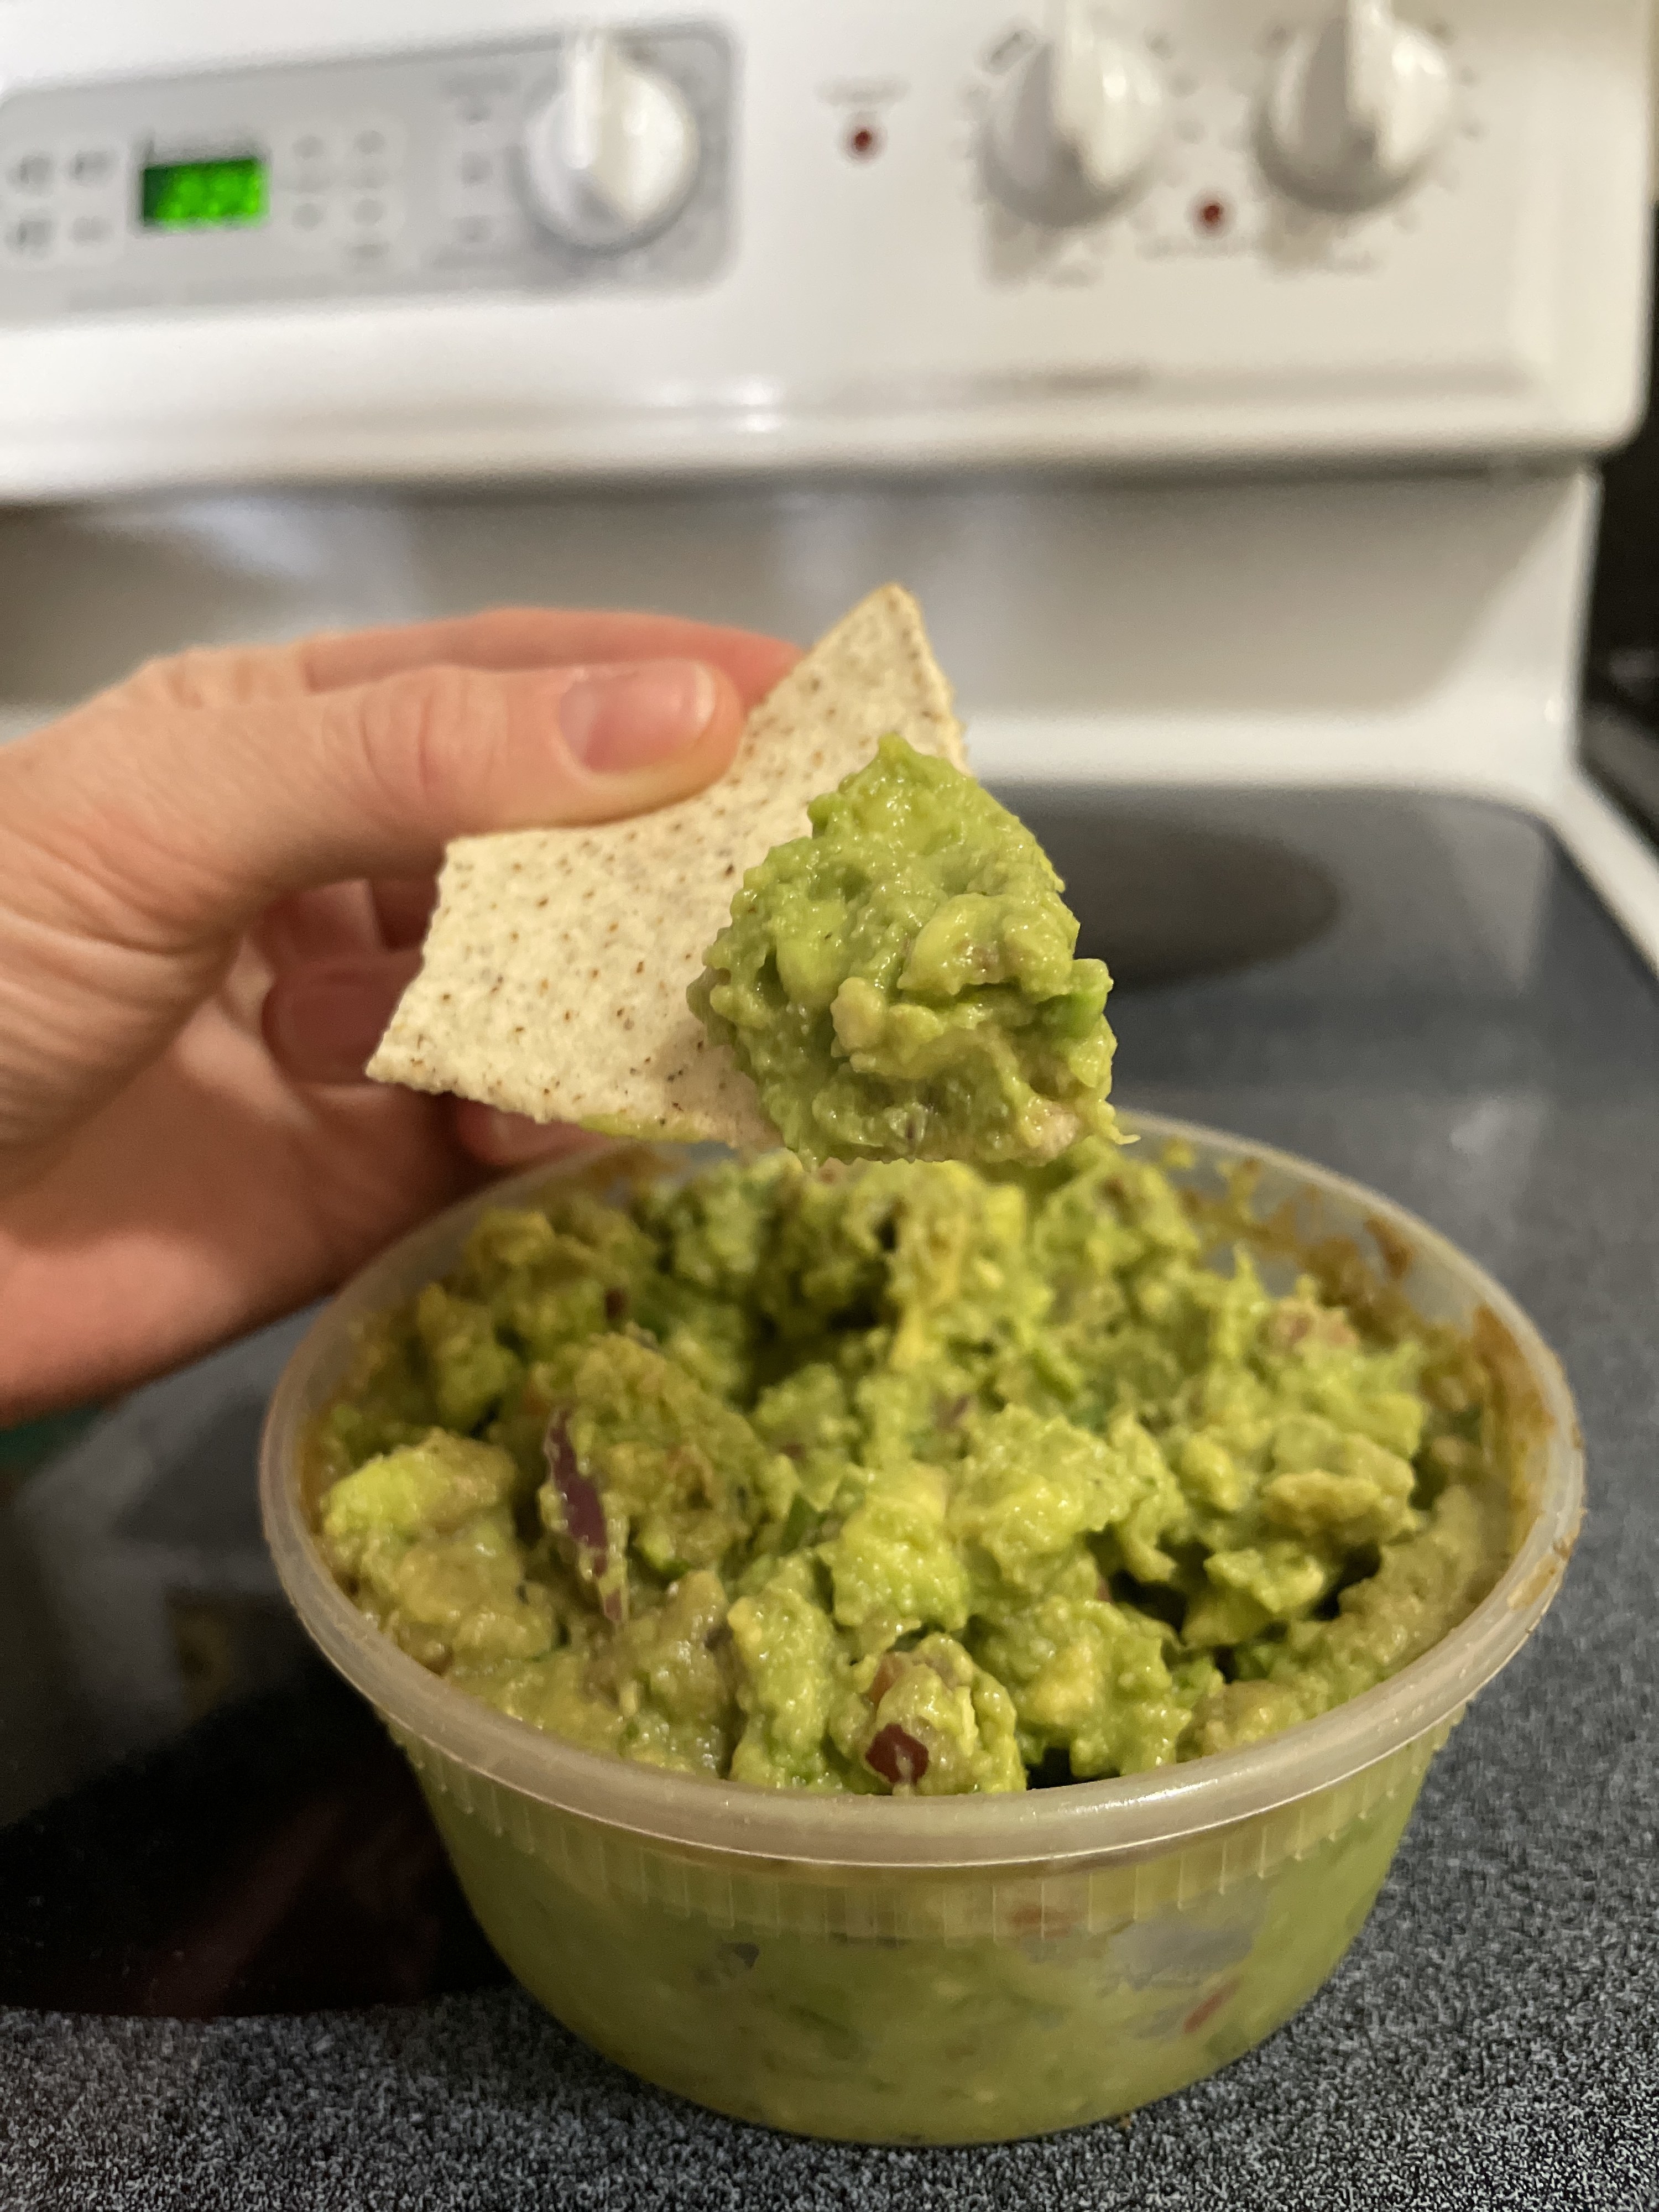 Hand holding a chip with guac on it above a container of guac